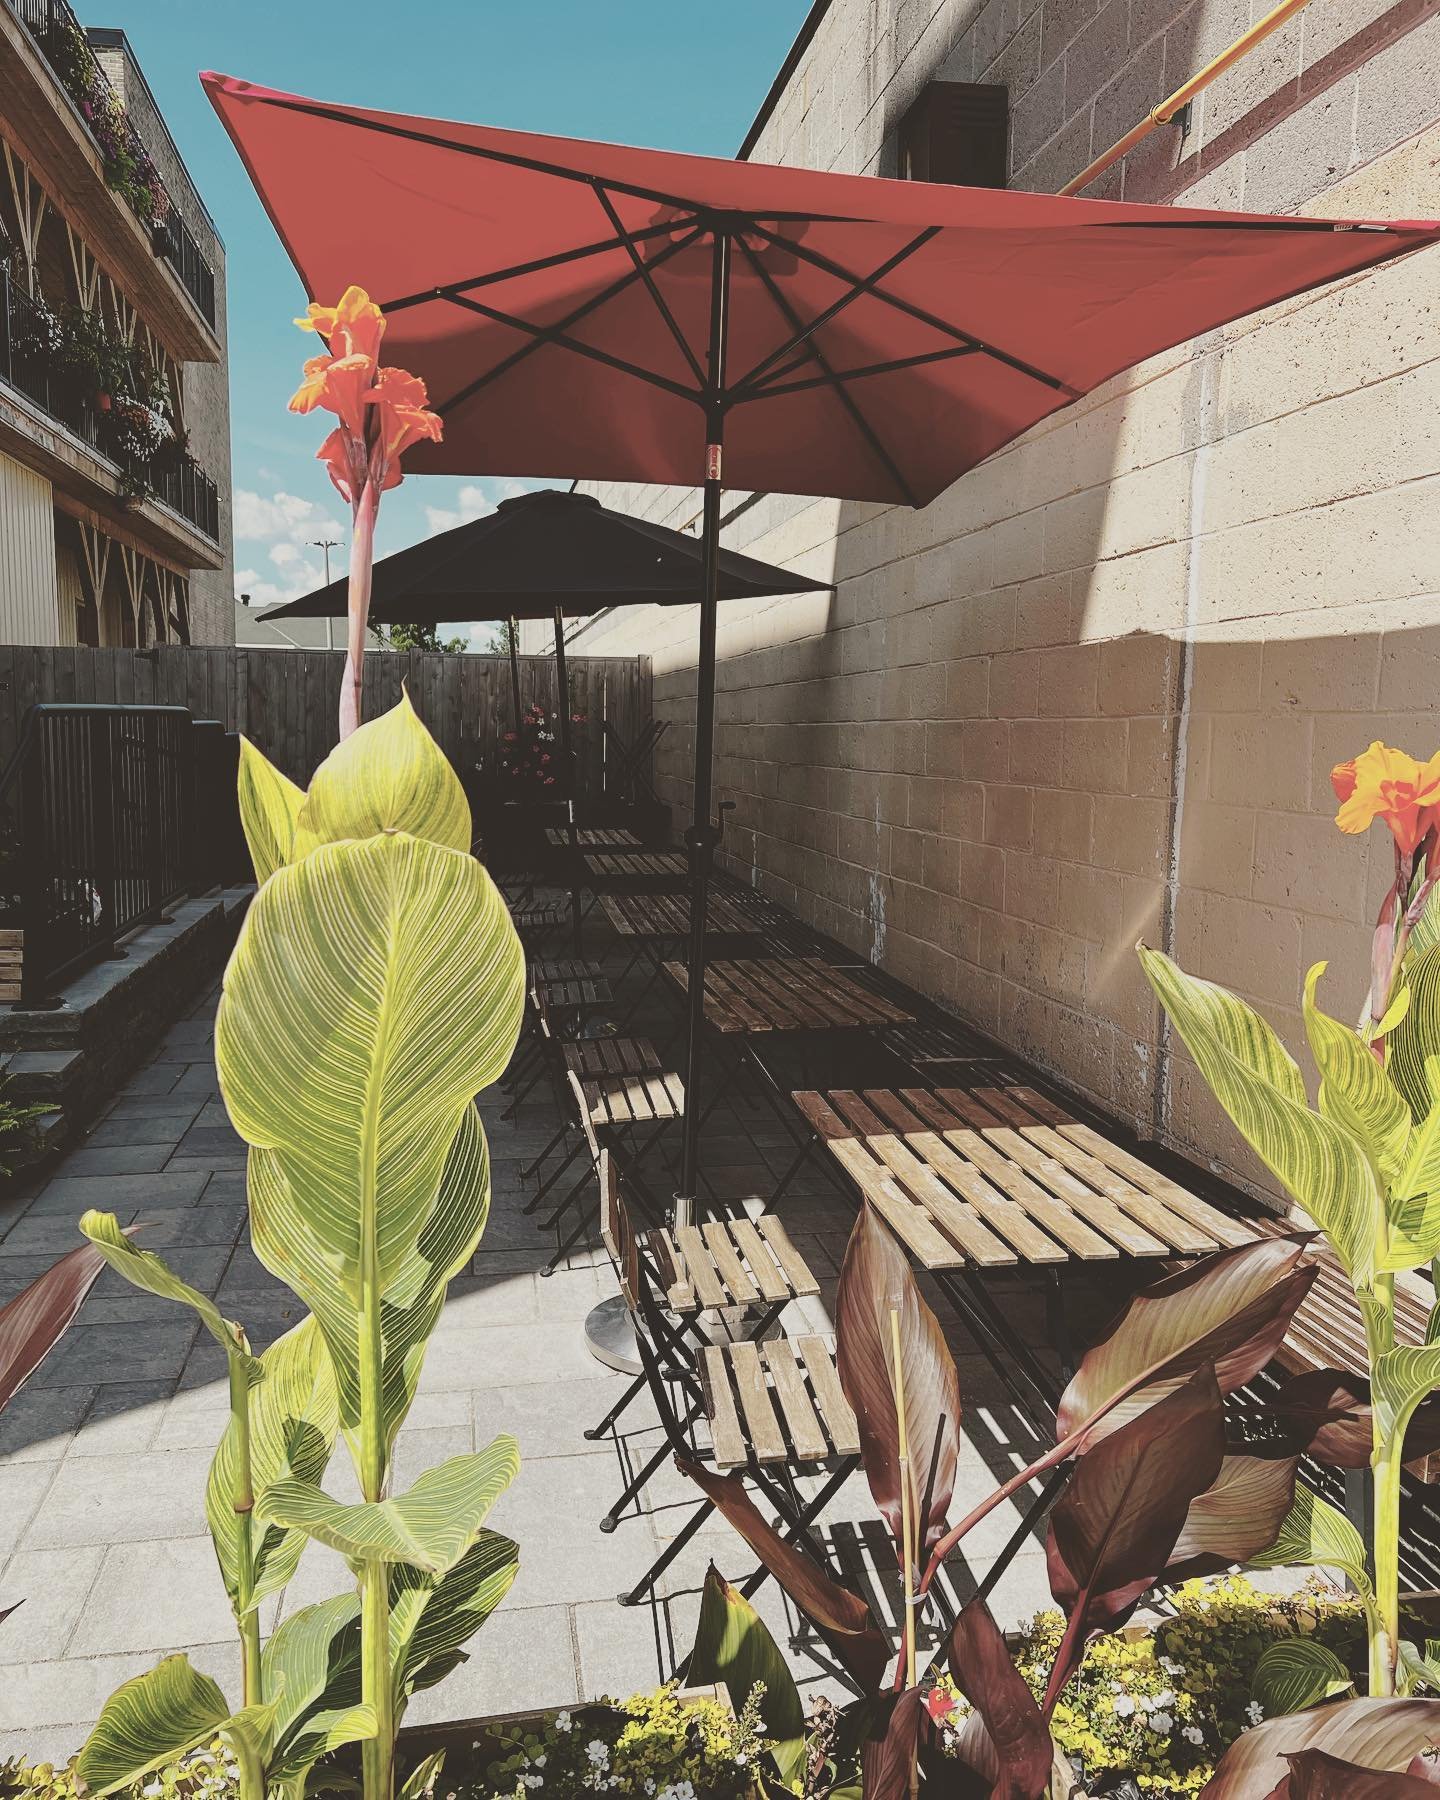 Patio season has arrived!  The patio is open, ready and waiting for you and don't forget, it's pet friendly for your leashed and friendly puppers so you don't have to leave Fido behind 🦮

(and yeah, these are last year's flowers but it'll soon be lo